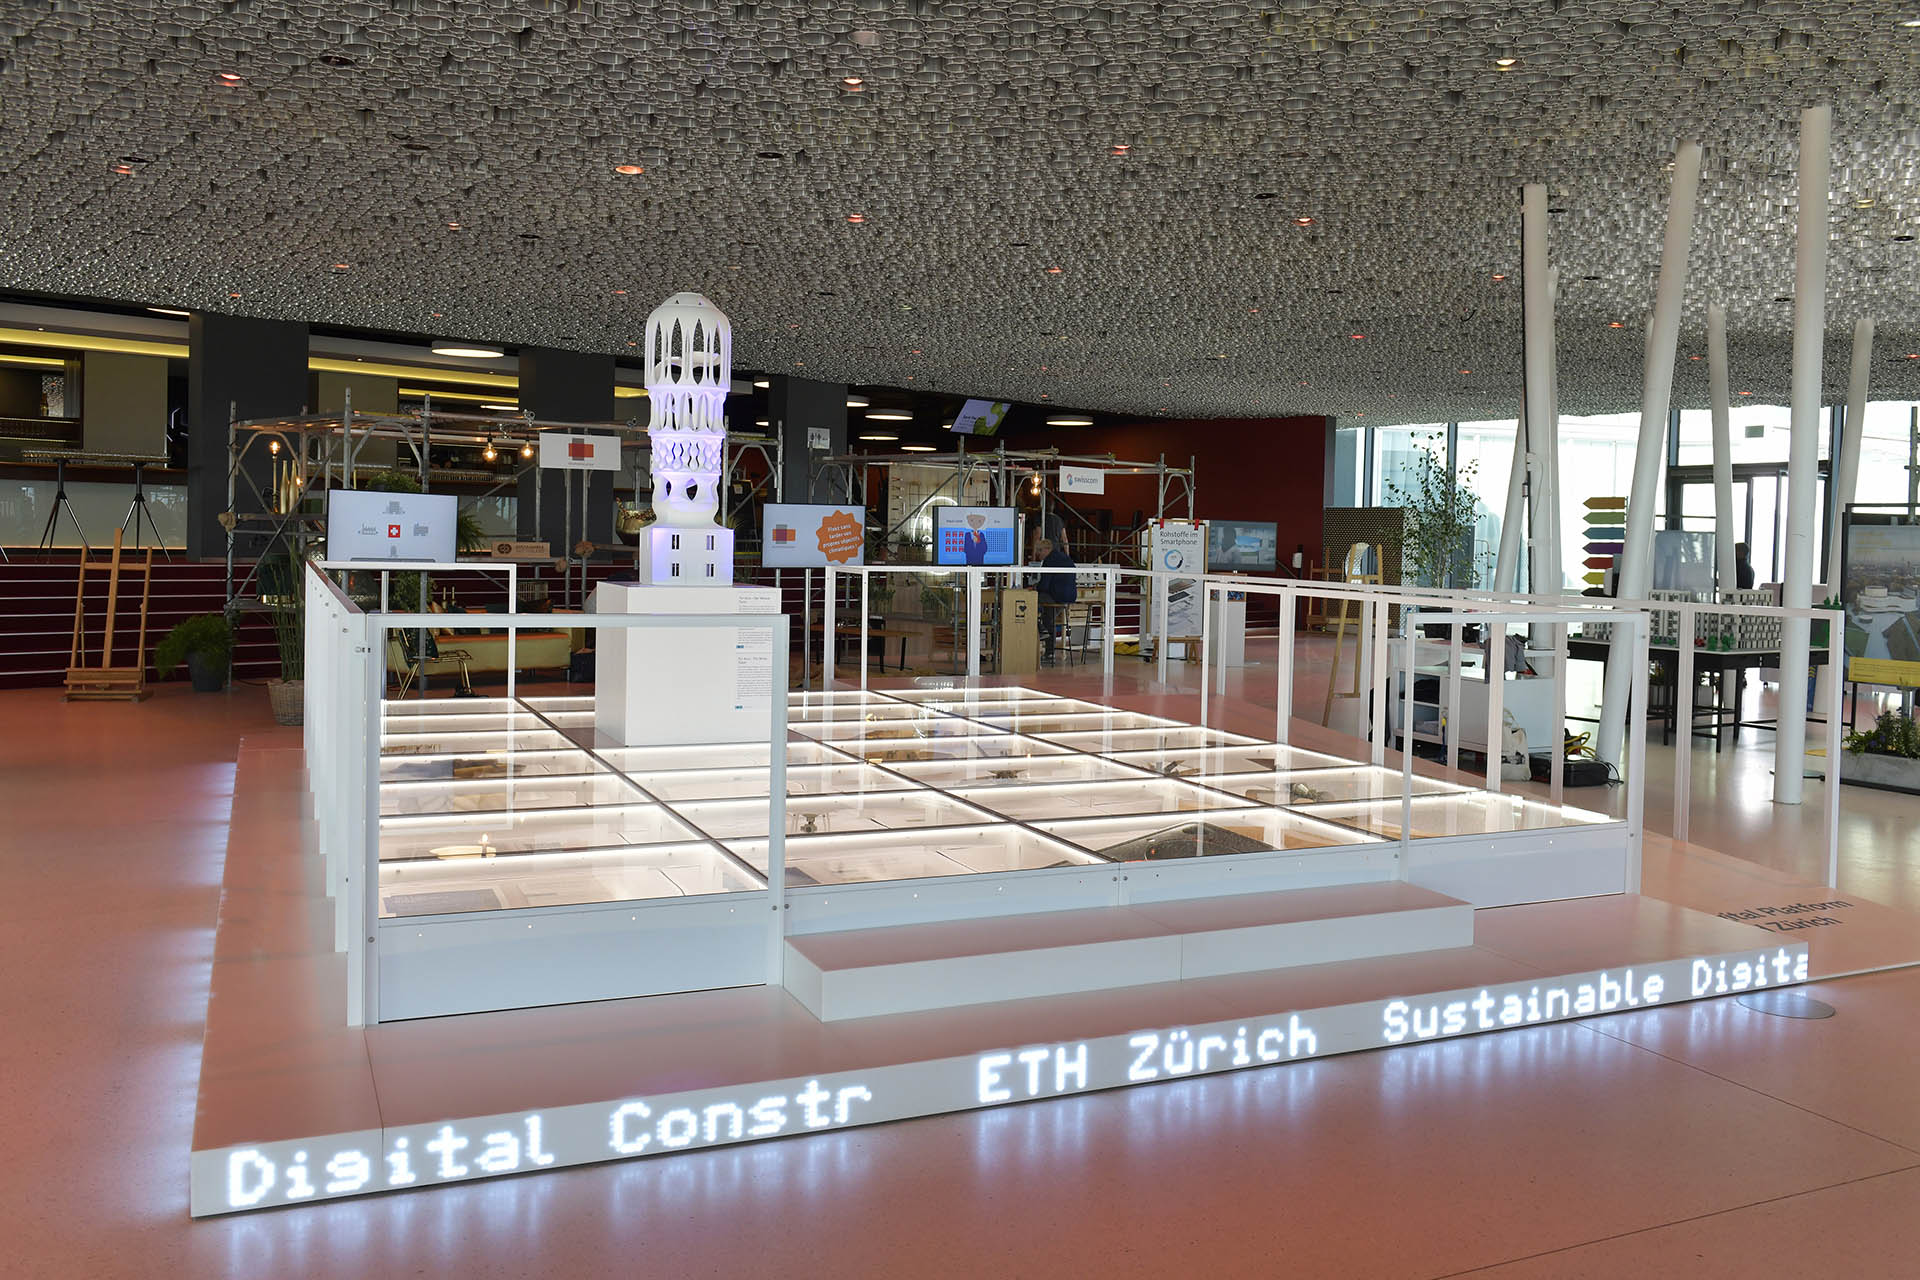 Image of the exhibition